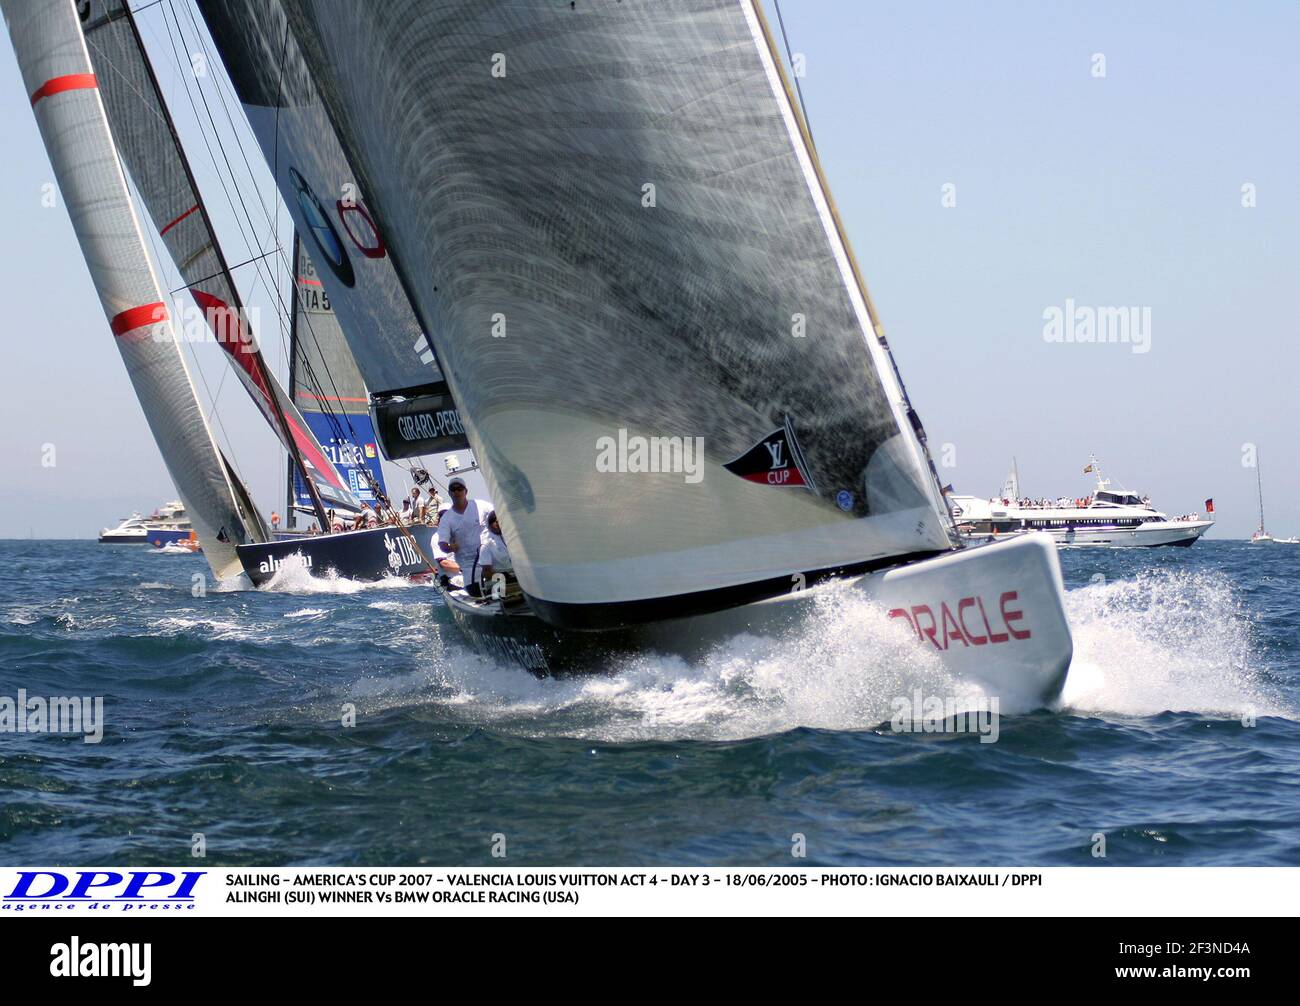 SAILING - AMERICA'S CUP 1992 - SAN DIEGO , CALIFORNIA (USA) - LOUIS VUITTON  CUP - ROUND ROBIN 3 PHOTO : FRANCO PACE / DPPI NIPPON (JAP) / SKIPPER :  CHRIS DICKSON (NZL) AT THE MARK Stock Photo - Alamy